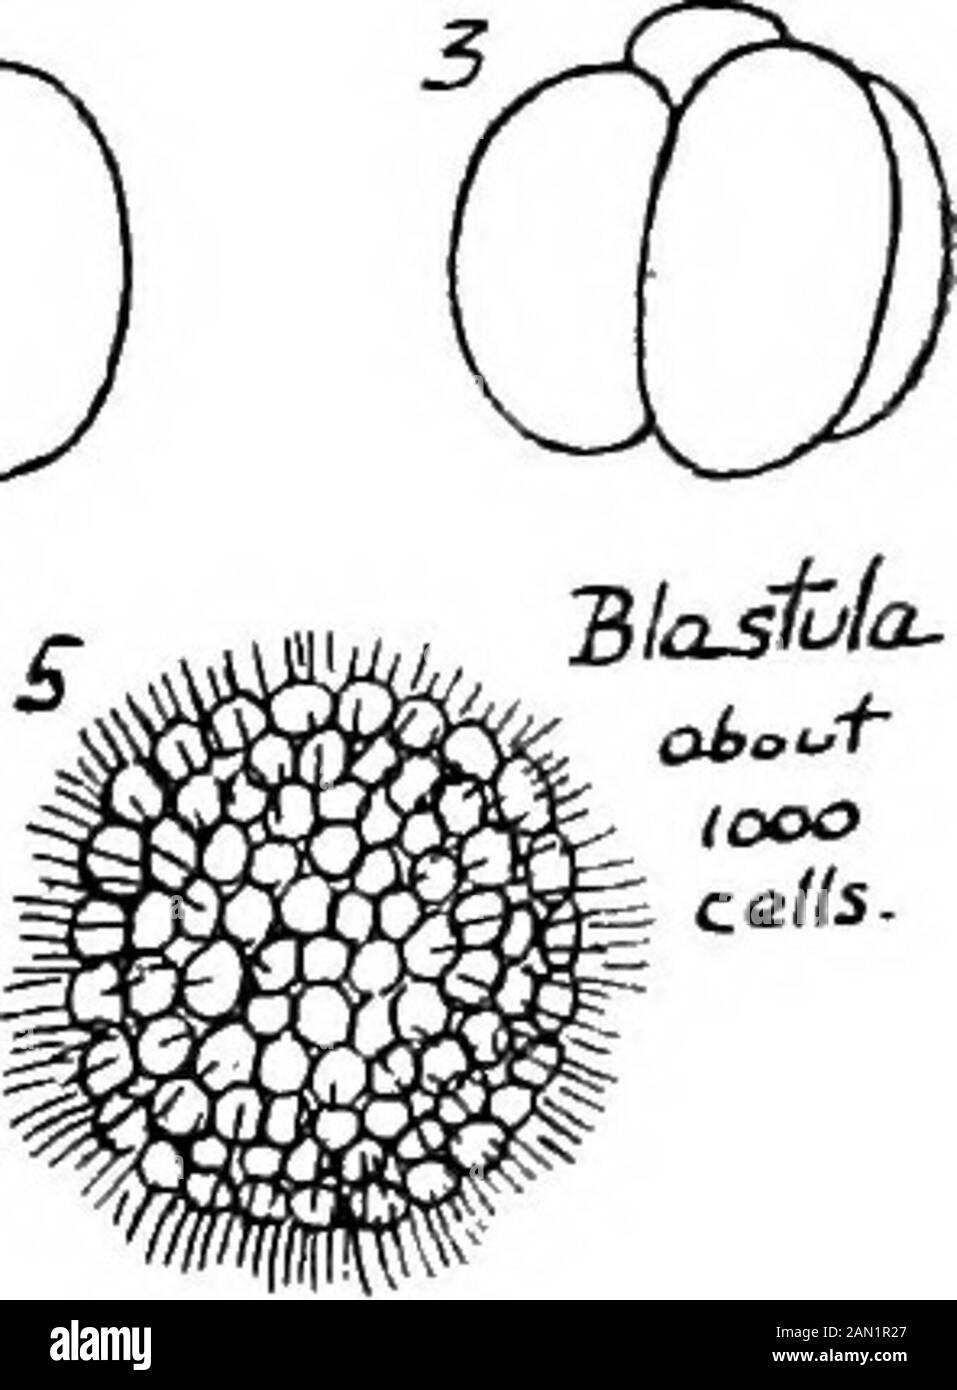 The philosophy of biology . We may state verybriefly the main facts of ^.^^^^.^.^^^the development of a ^c^x ^^ typical animal ovum,such as that of the sea-urchin. The fertilised ovum fig. 12. divides into two (2), and then each of these blastomeres divides agiain in a planeperpendicular to the first division plane (3). The thirddivision plane is at right angles to the first two, and itcuts off a tier of smaller blastomeres from the tops of thefirst four. There are now (4) two tiers of blastomeres,a lower tier of large blastomeres and an upper tierof smaller ones. This is the 8-cell stage. Nex Stock Photo